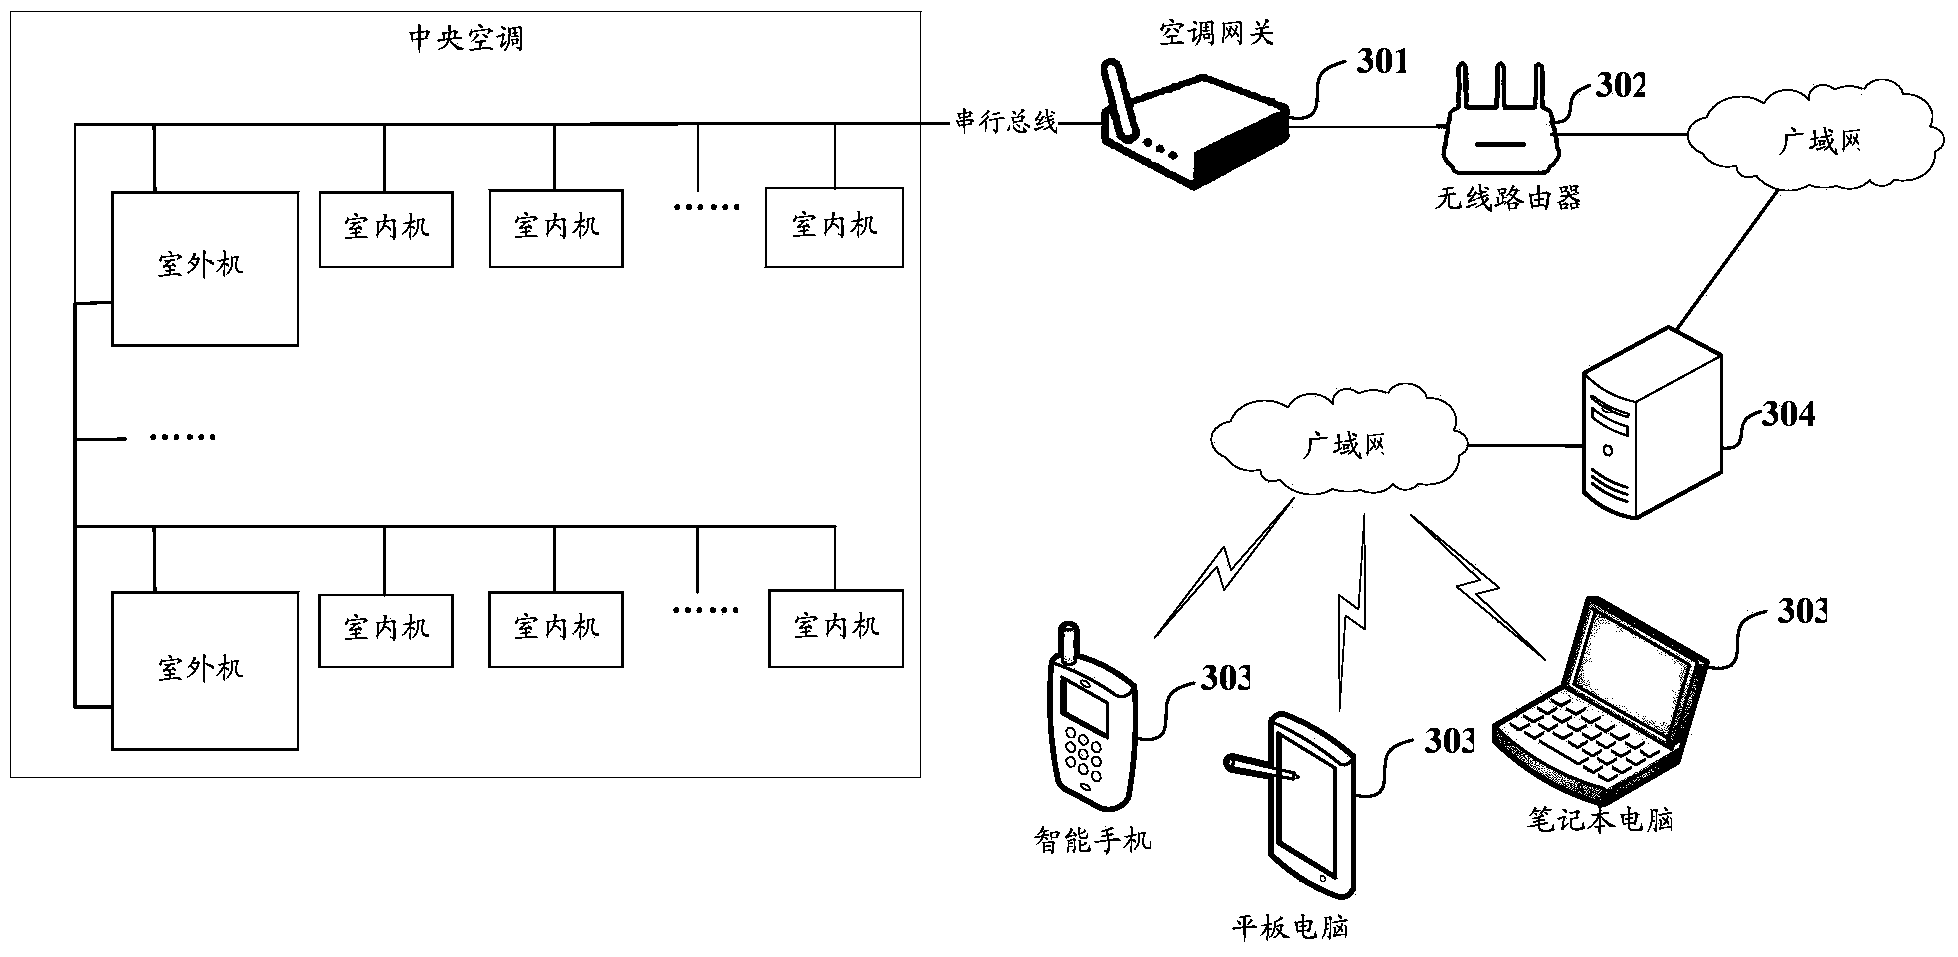 Central air conditioning control system and control method compatible with local area network and wide area network